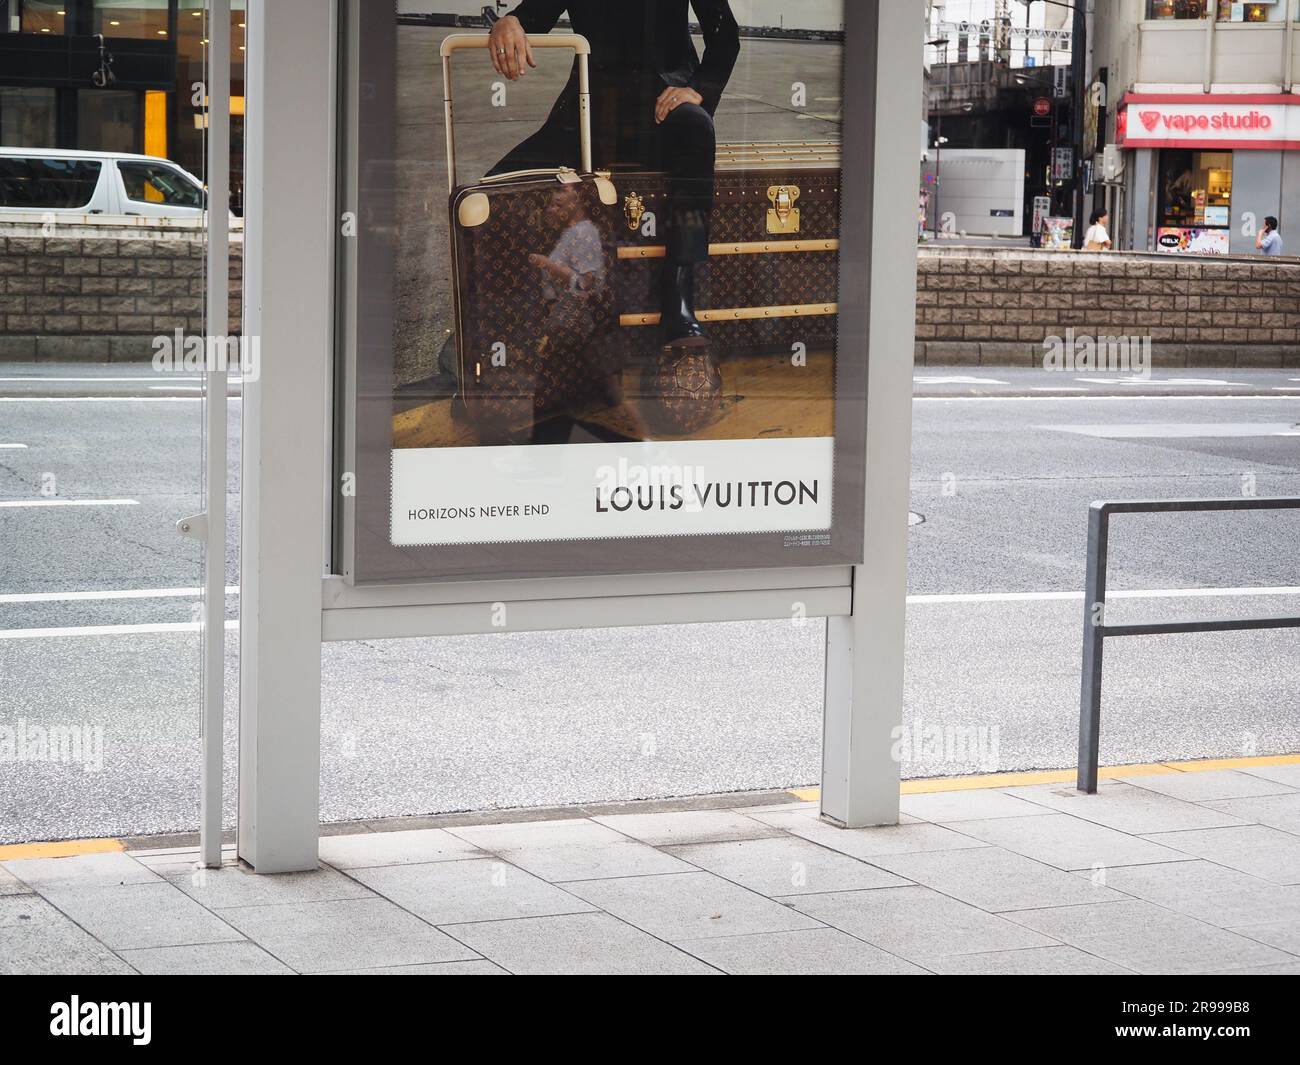 Louis Vuitton, Travel goods — Original adverts and images